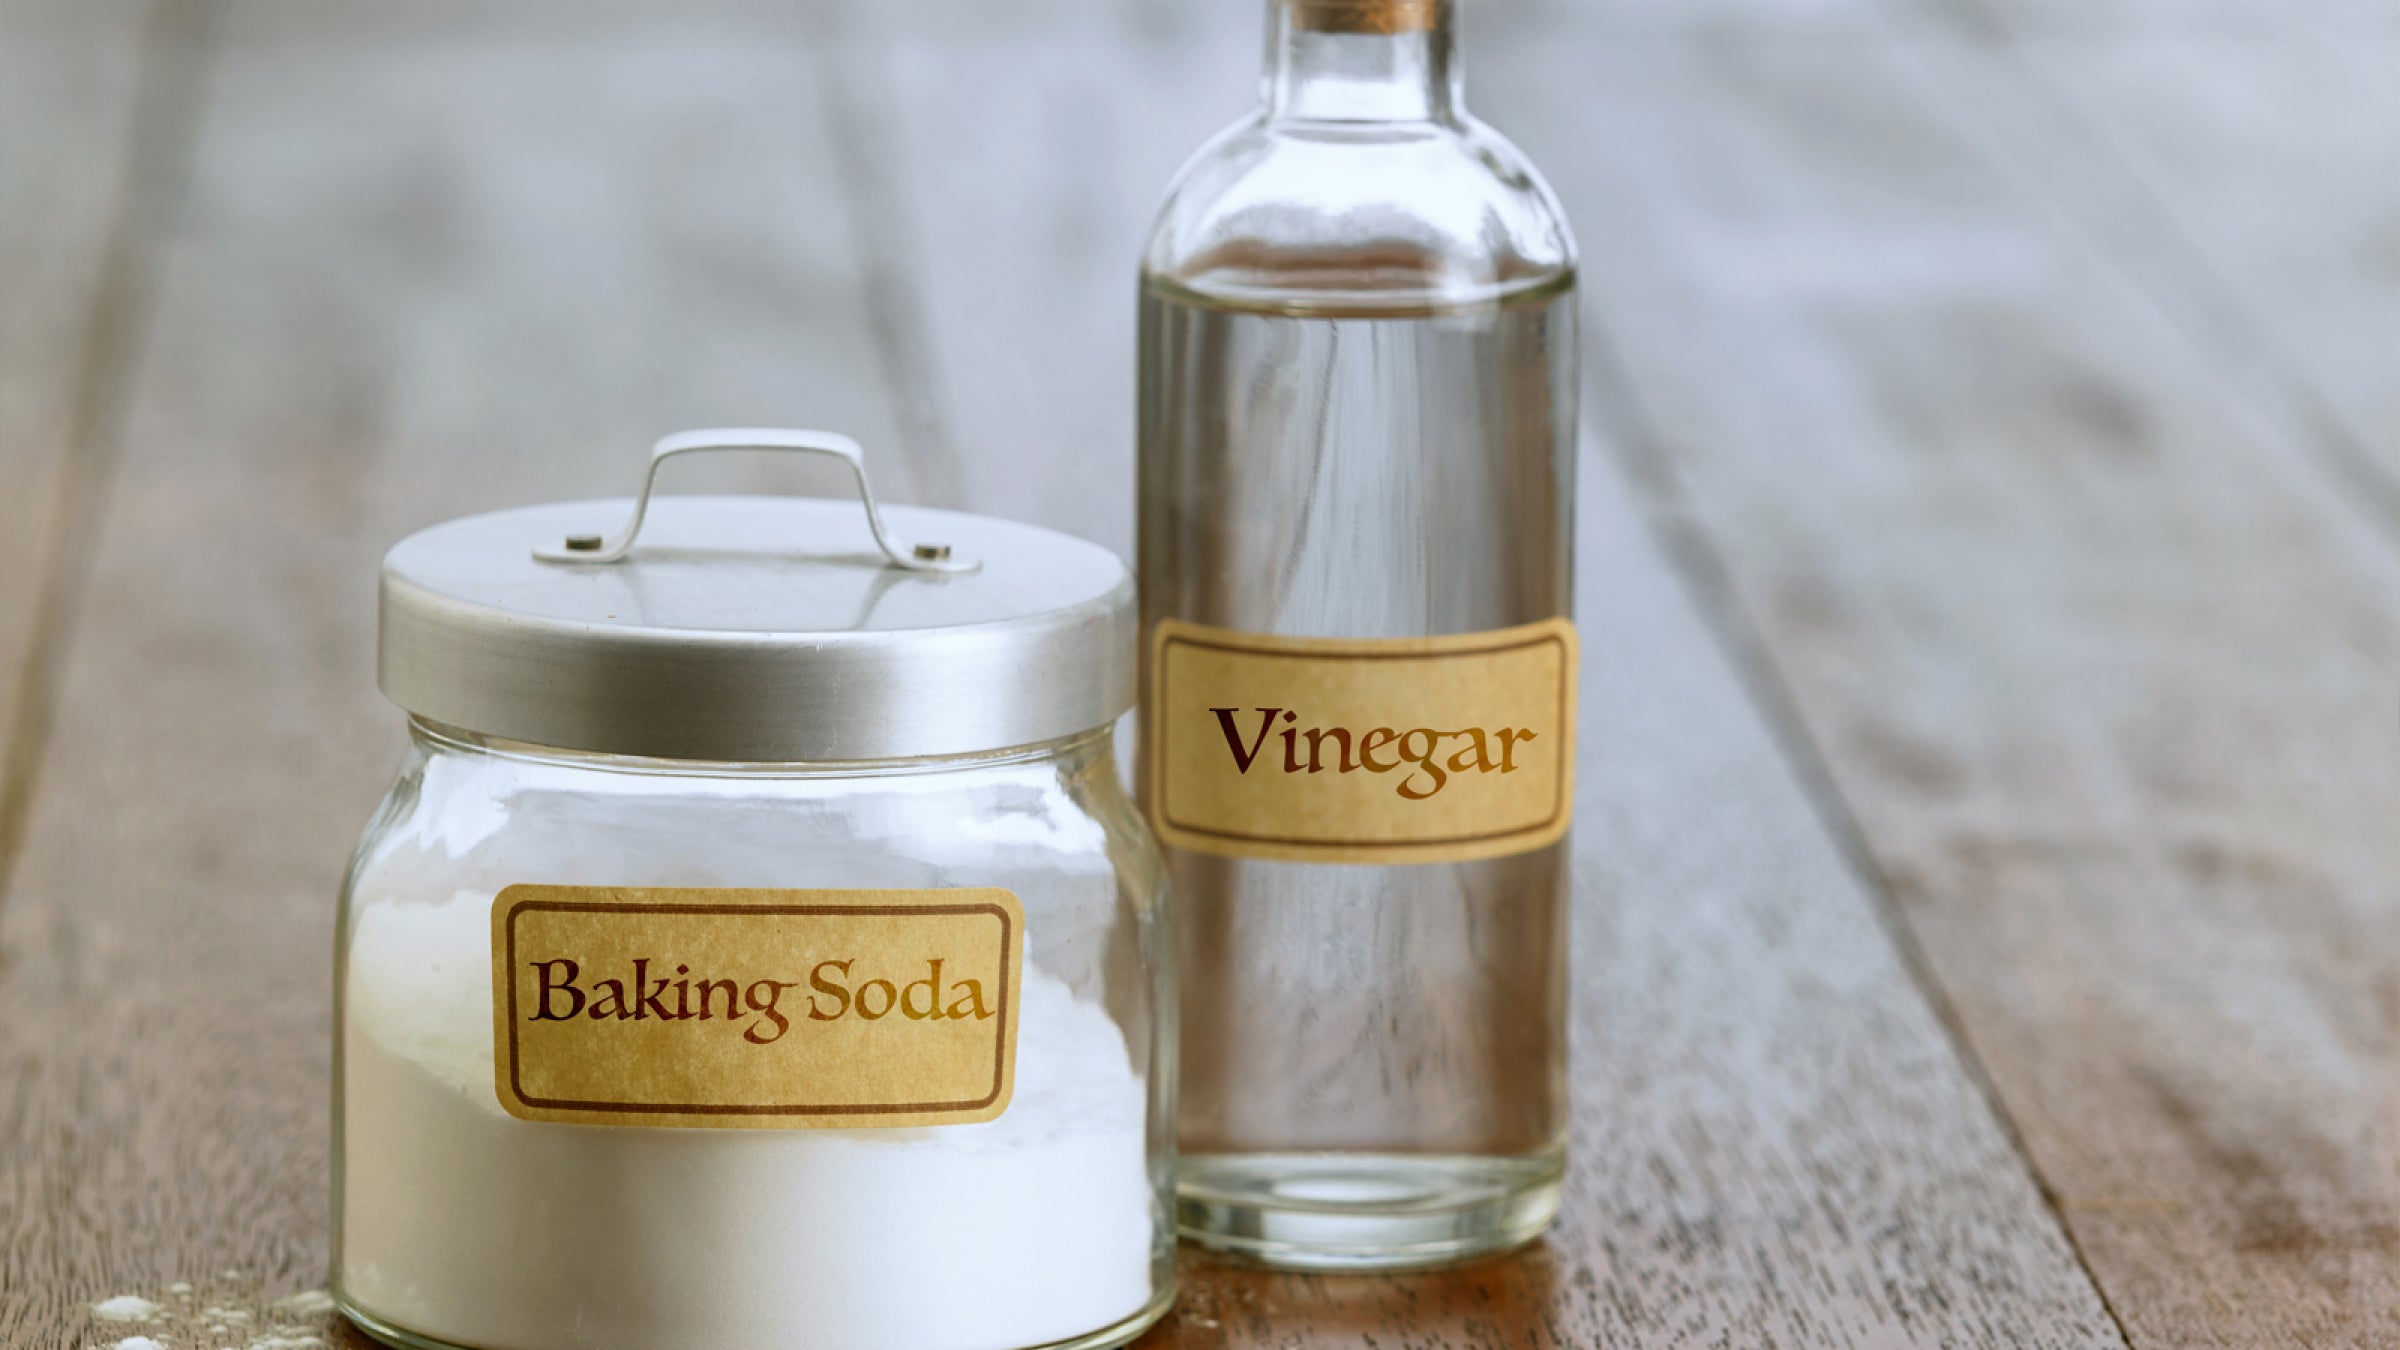 Two glass jars with labels for baking soda and vinegar